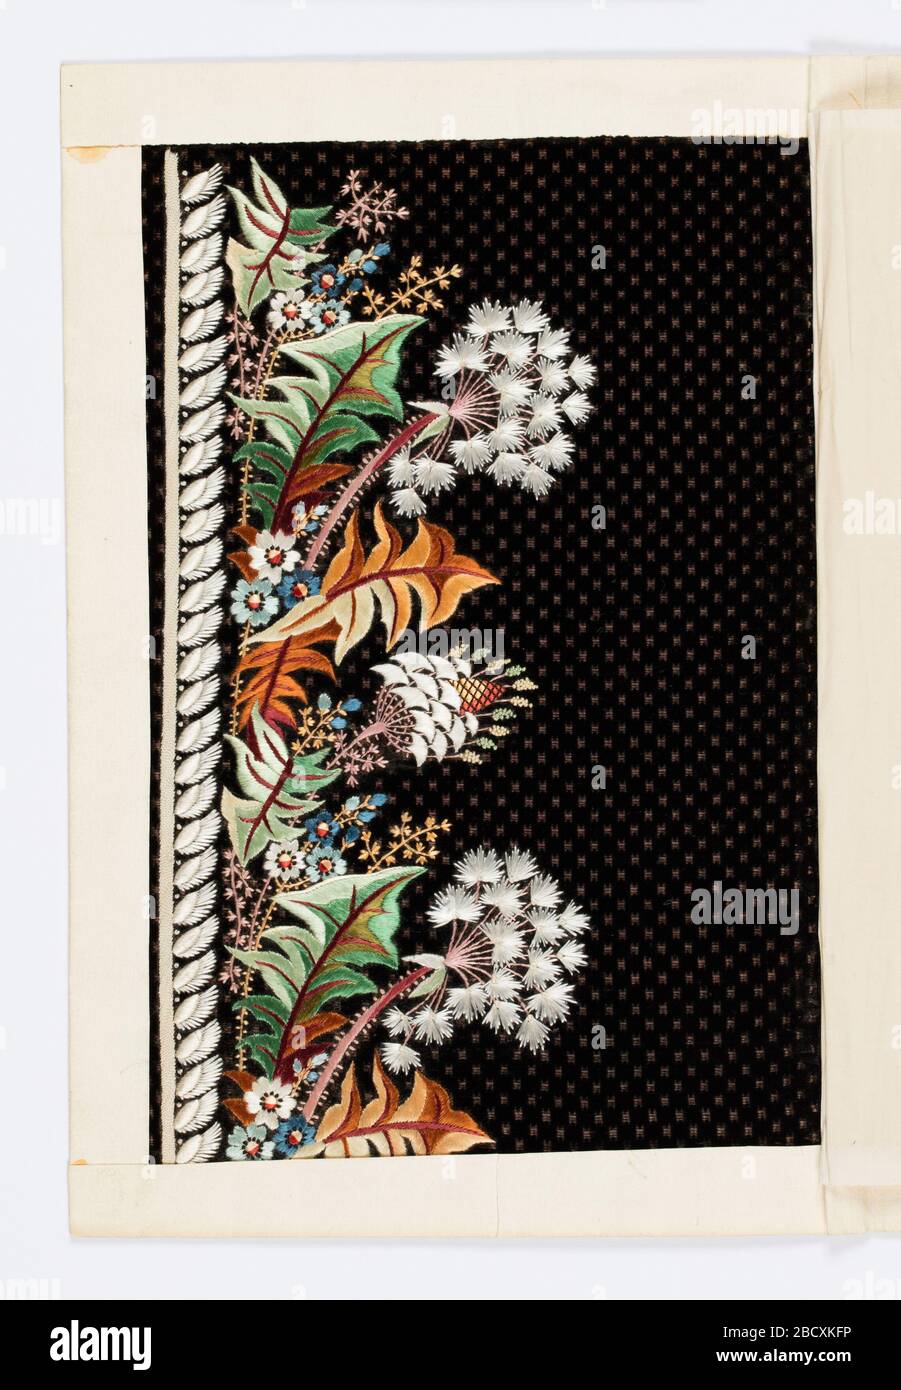 Embroidery sample. Research in ProgressDark purple velvet with minute square dot pattern; embroidered border design in white and brilliant colored silks. Pattern of fantastic foliage and flowers. Embroidery sample Stock Photo